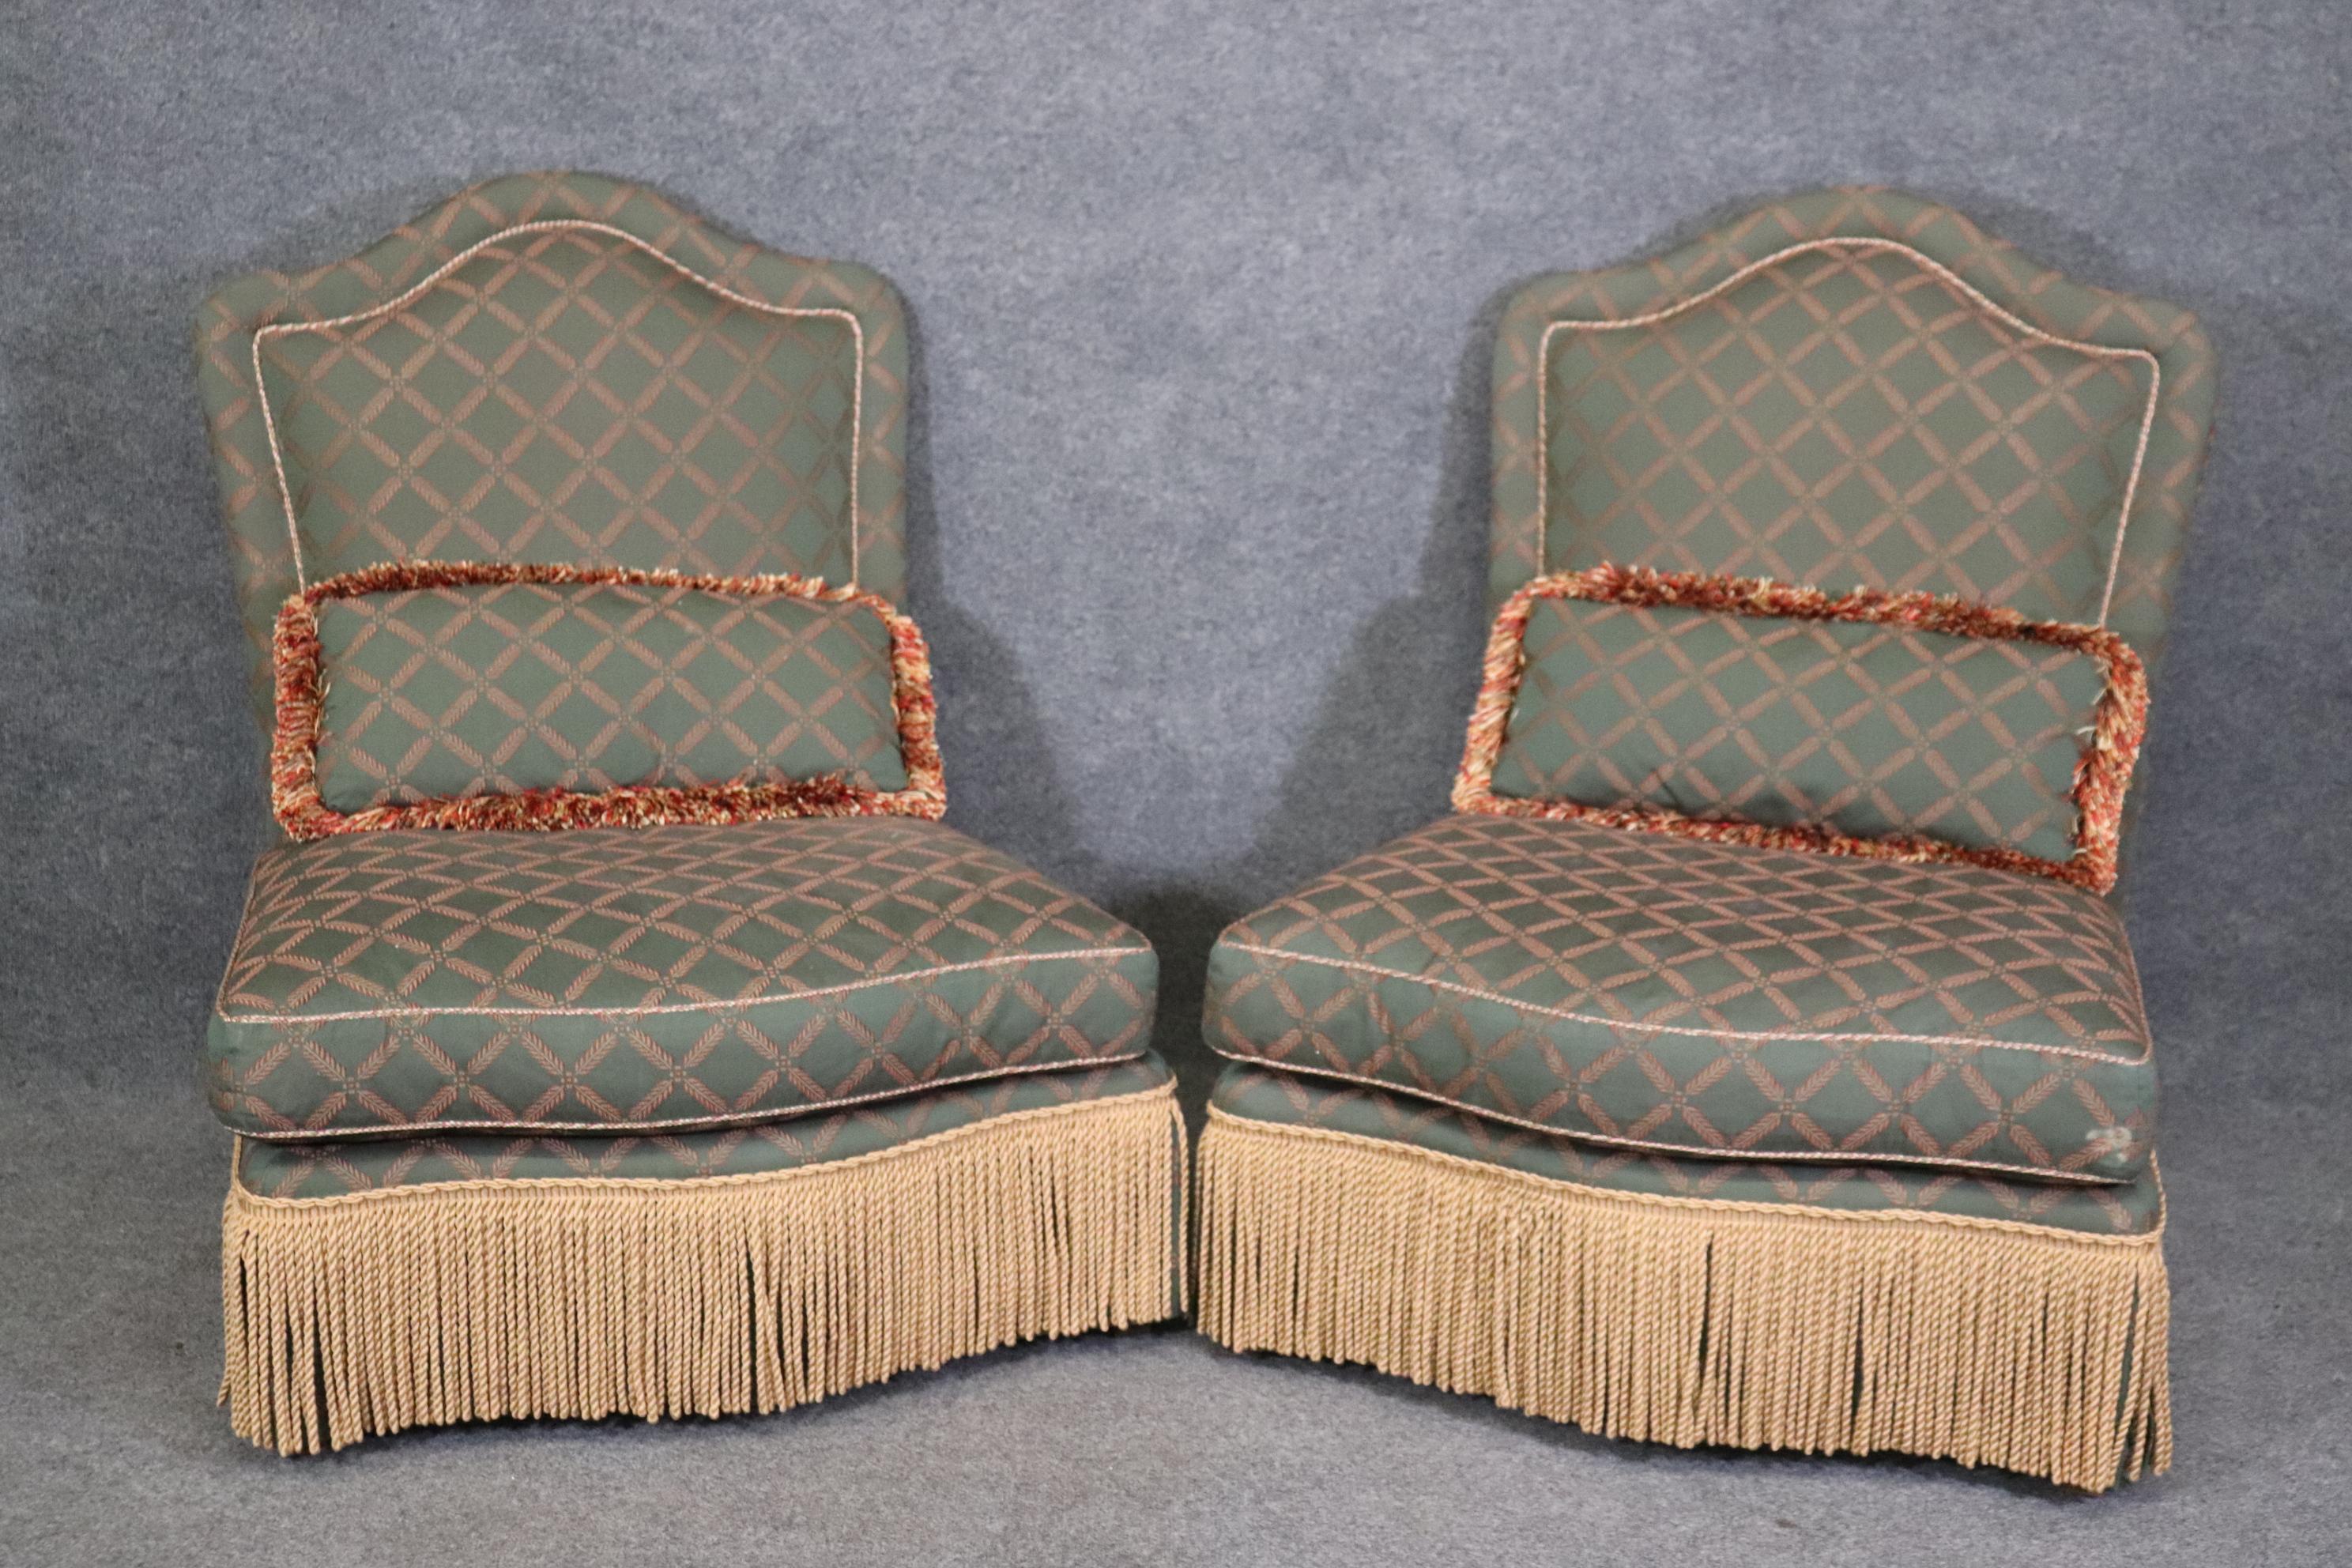 This is a nice pair of rare armless bergere chairs made by Baker Furniture of the USA. They are not perfect but can be made beautiful with some attention on your part. They each measure 40.25 tall x 32.5 wide x 37.25 deep and have a 16.5 inch seat